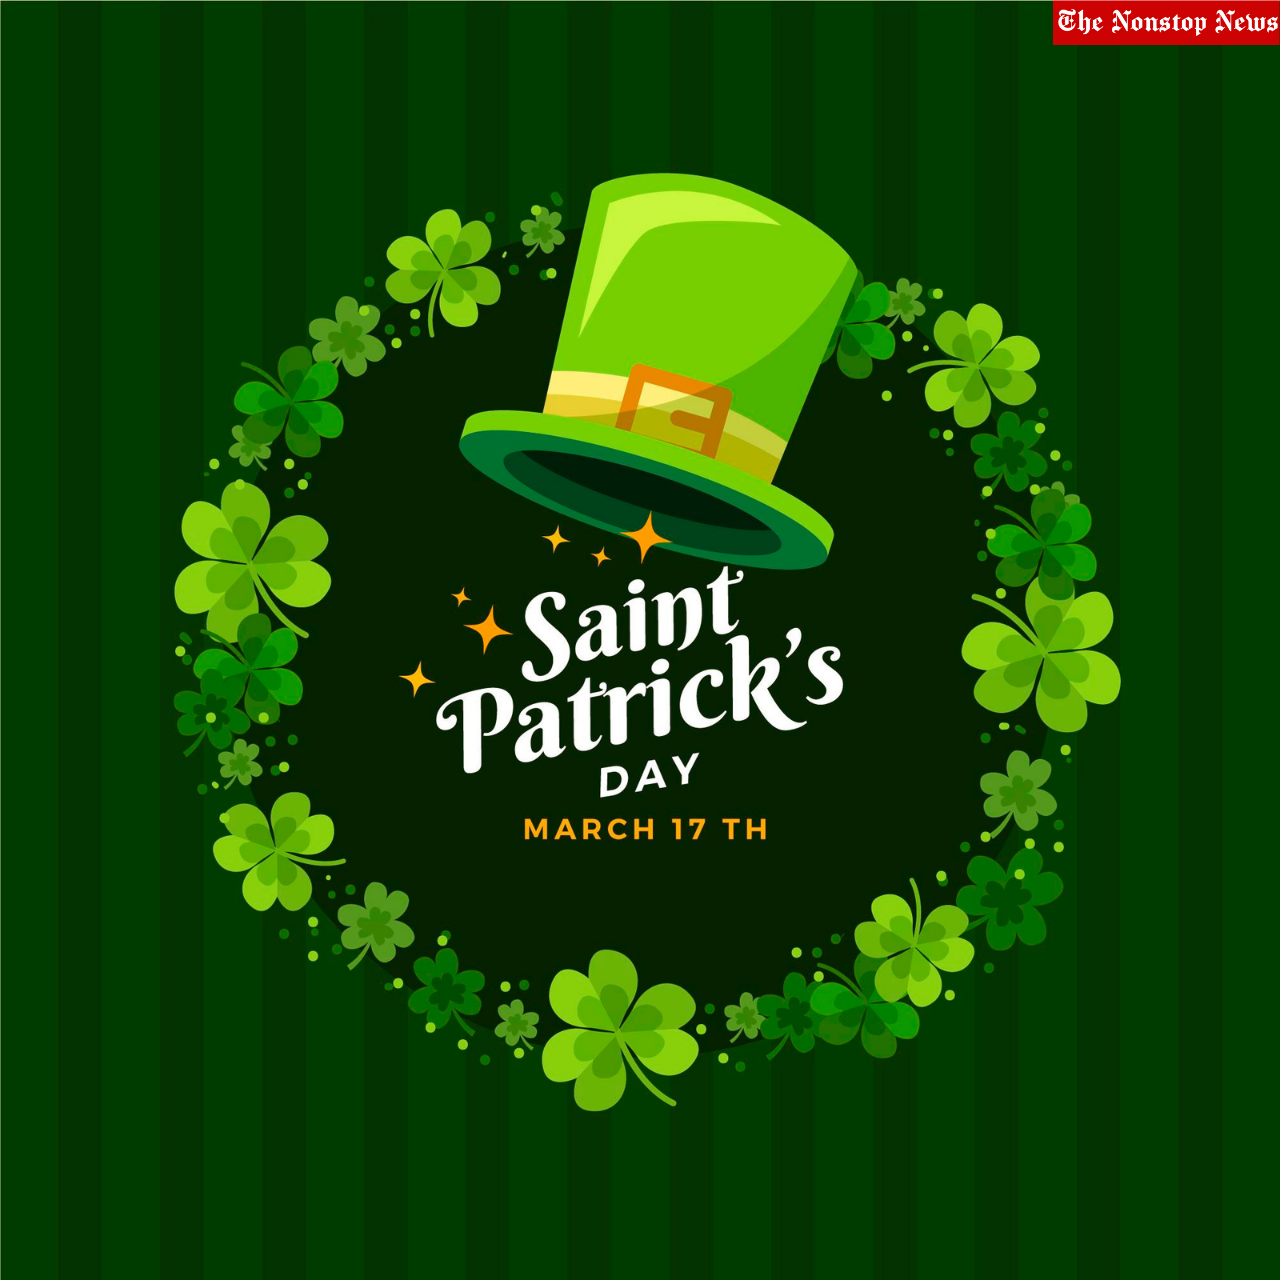 Saint Patrick Day 2022 Quotes, Messages, HD Images, Greetings, Sayings to Share